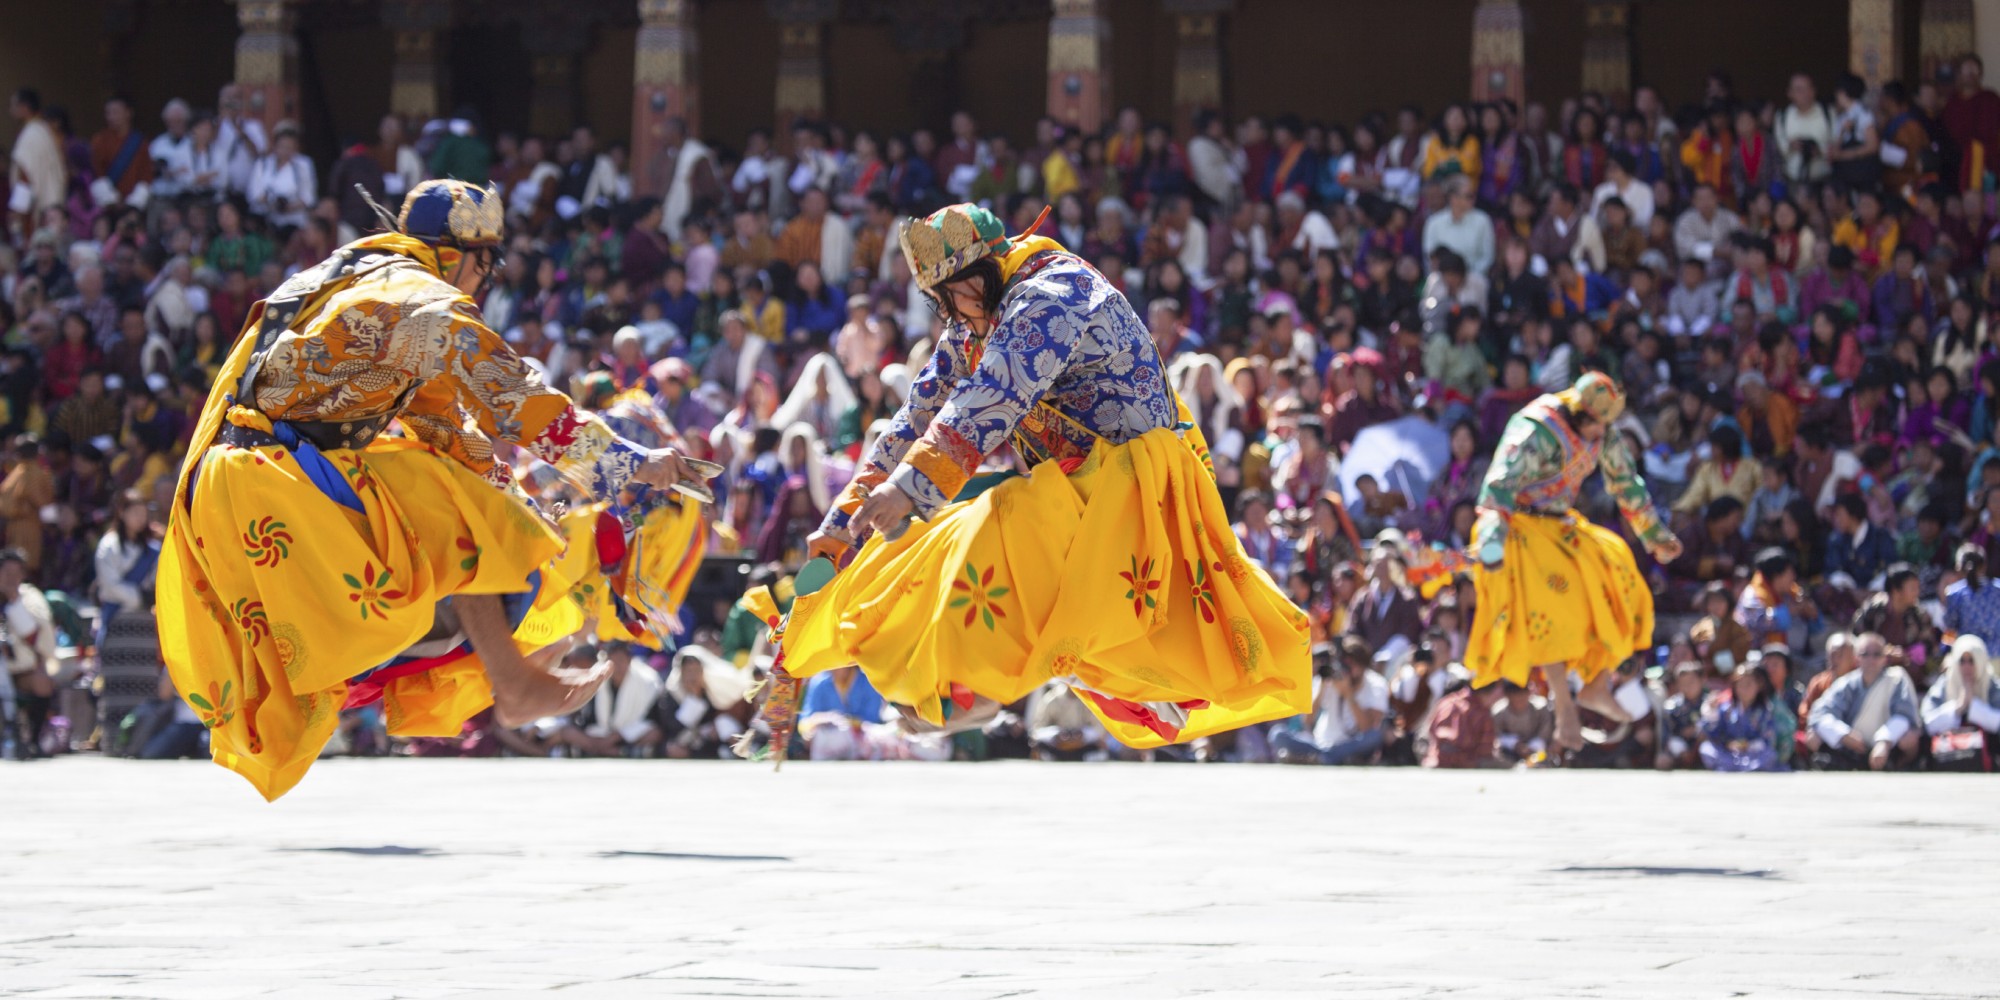 Each year one of the major festivals is held in Dzong of Thimphu. People form all the surrounding valleys gather during 3 days to watch all the traditional dances,